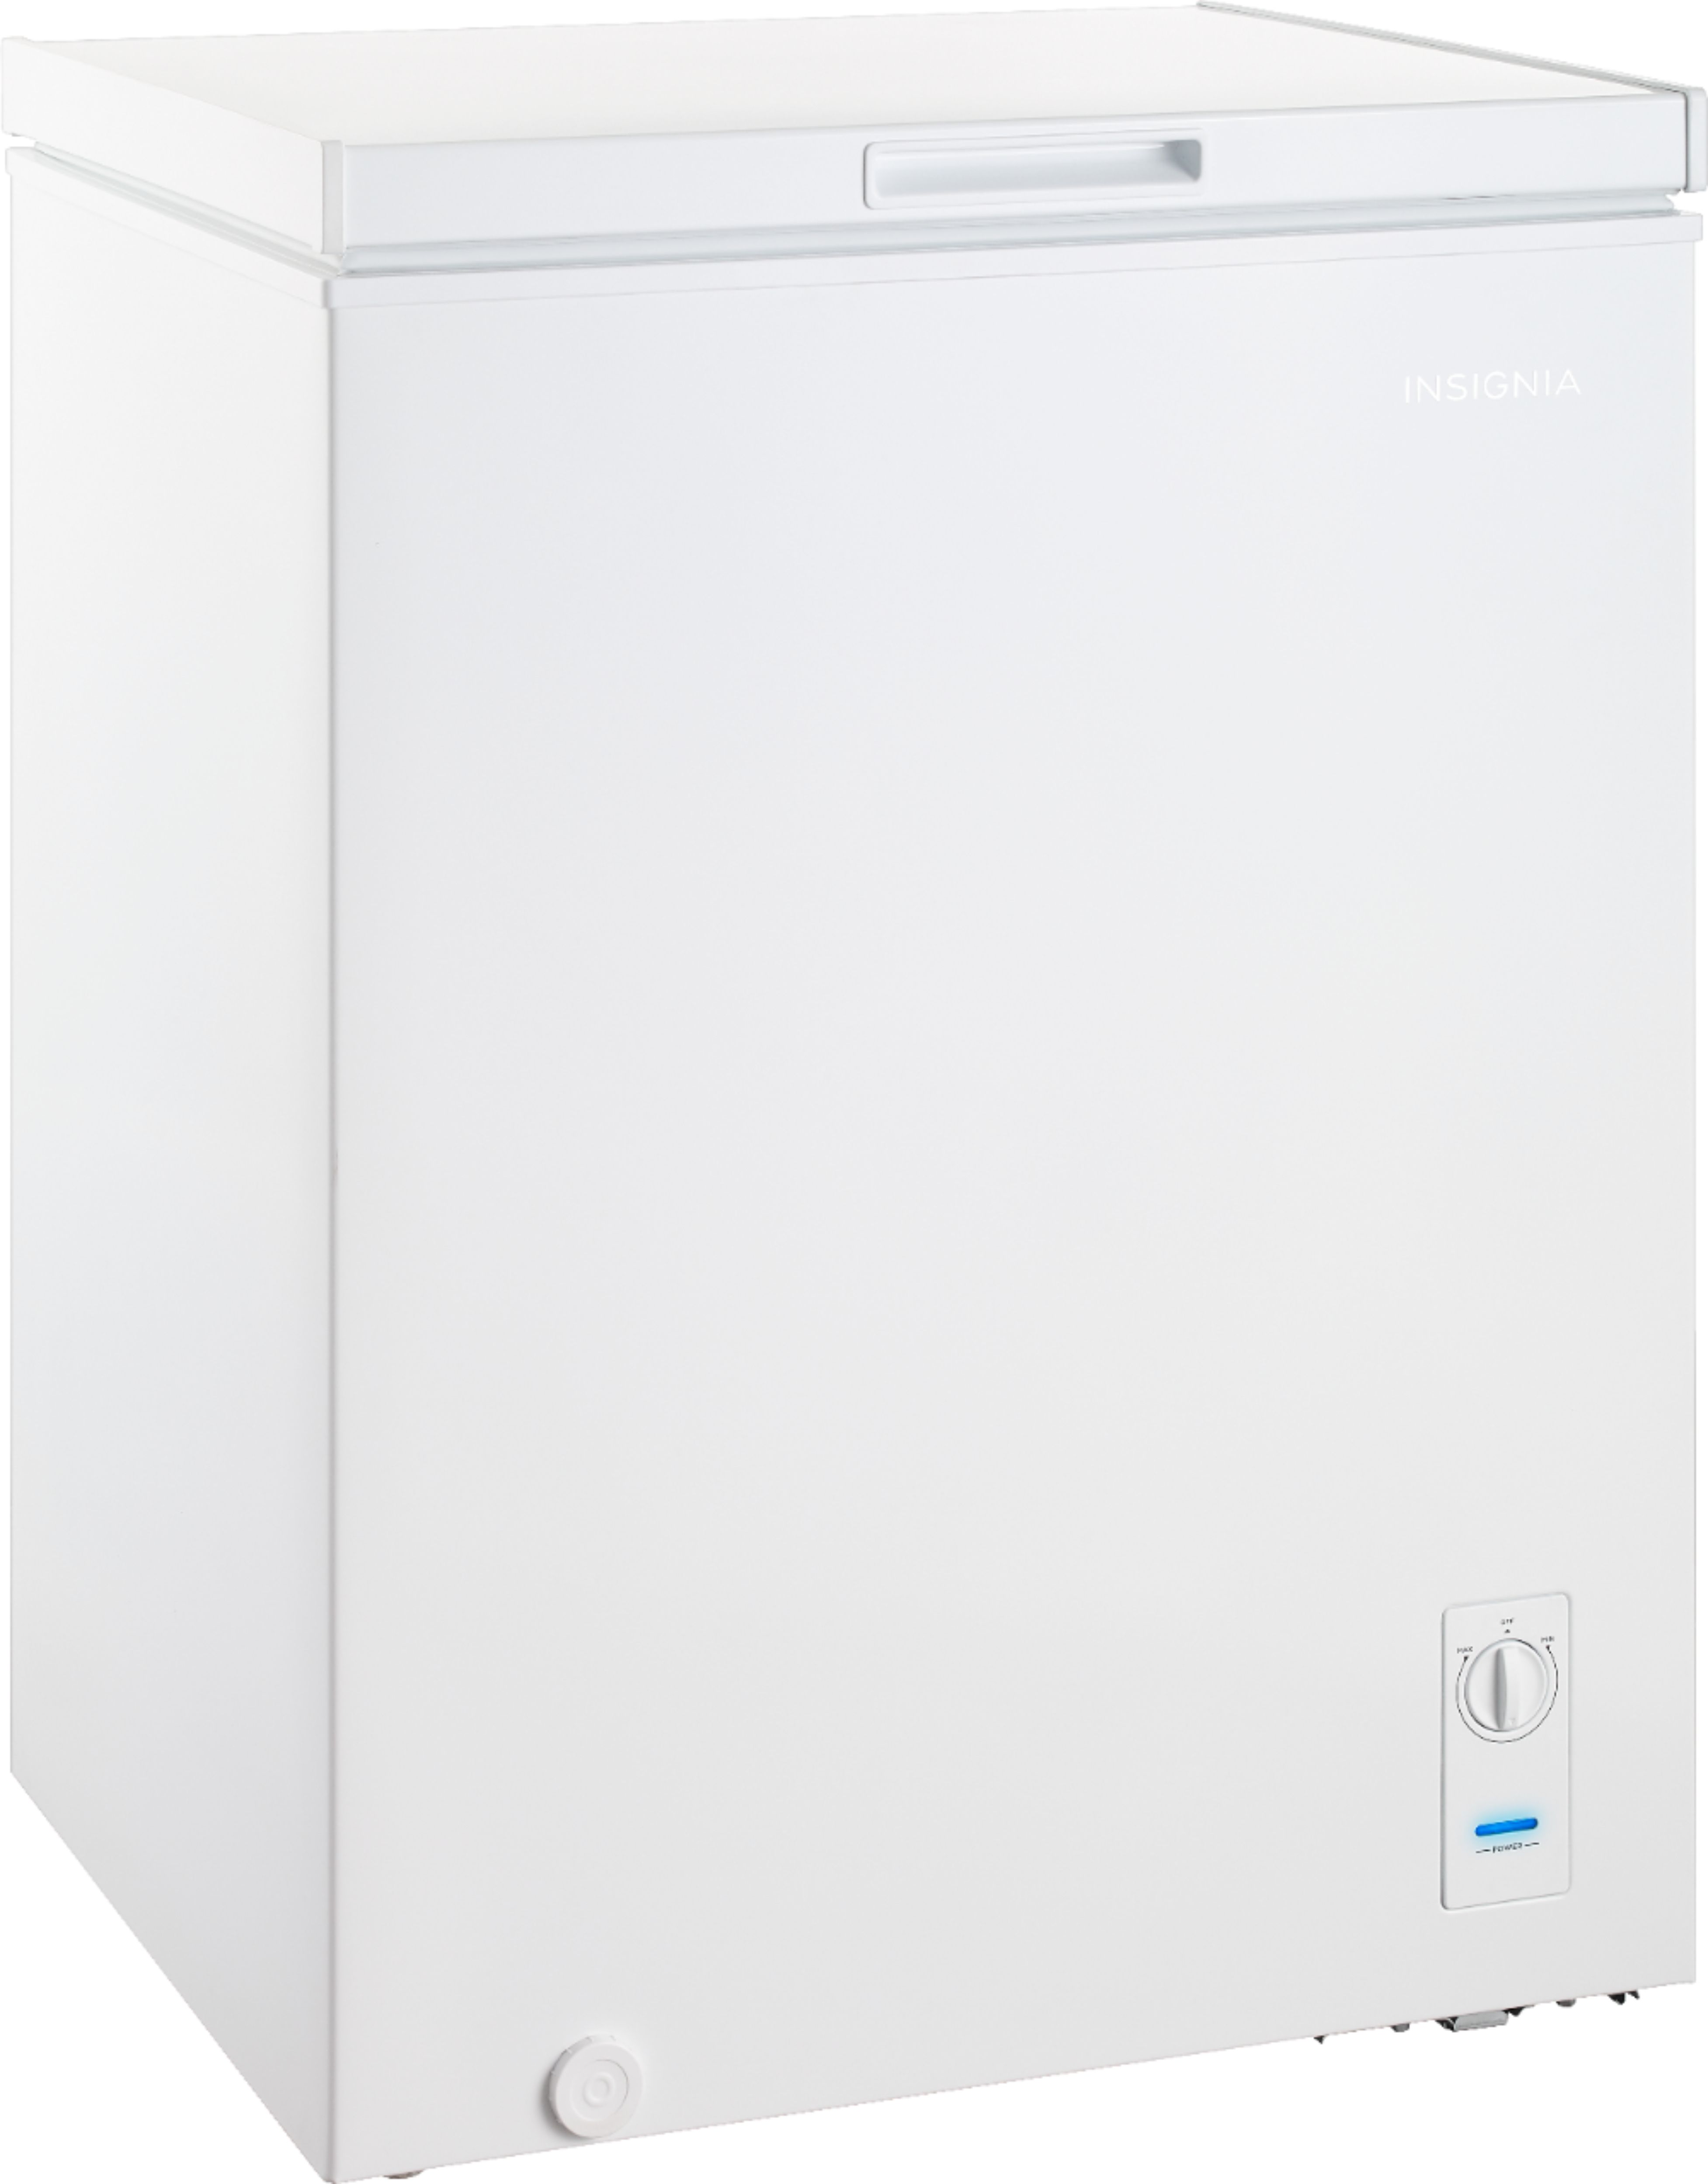 Angle View: Insignia™ - 5.0 Cu. Ft. Garage Ready-Chest Freezer - White